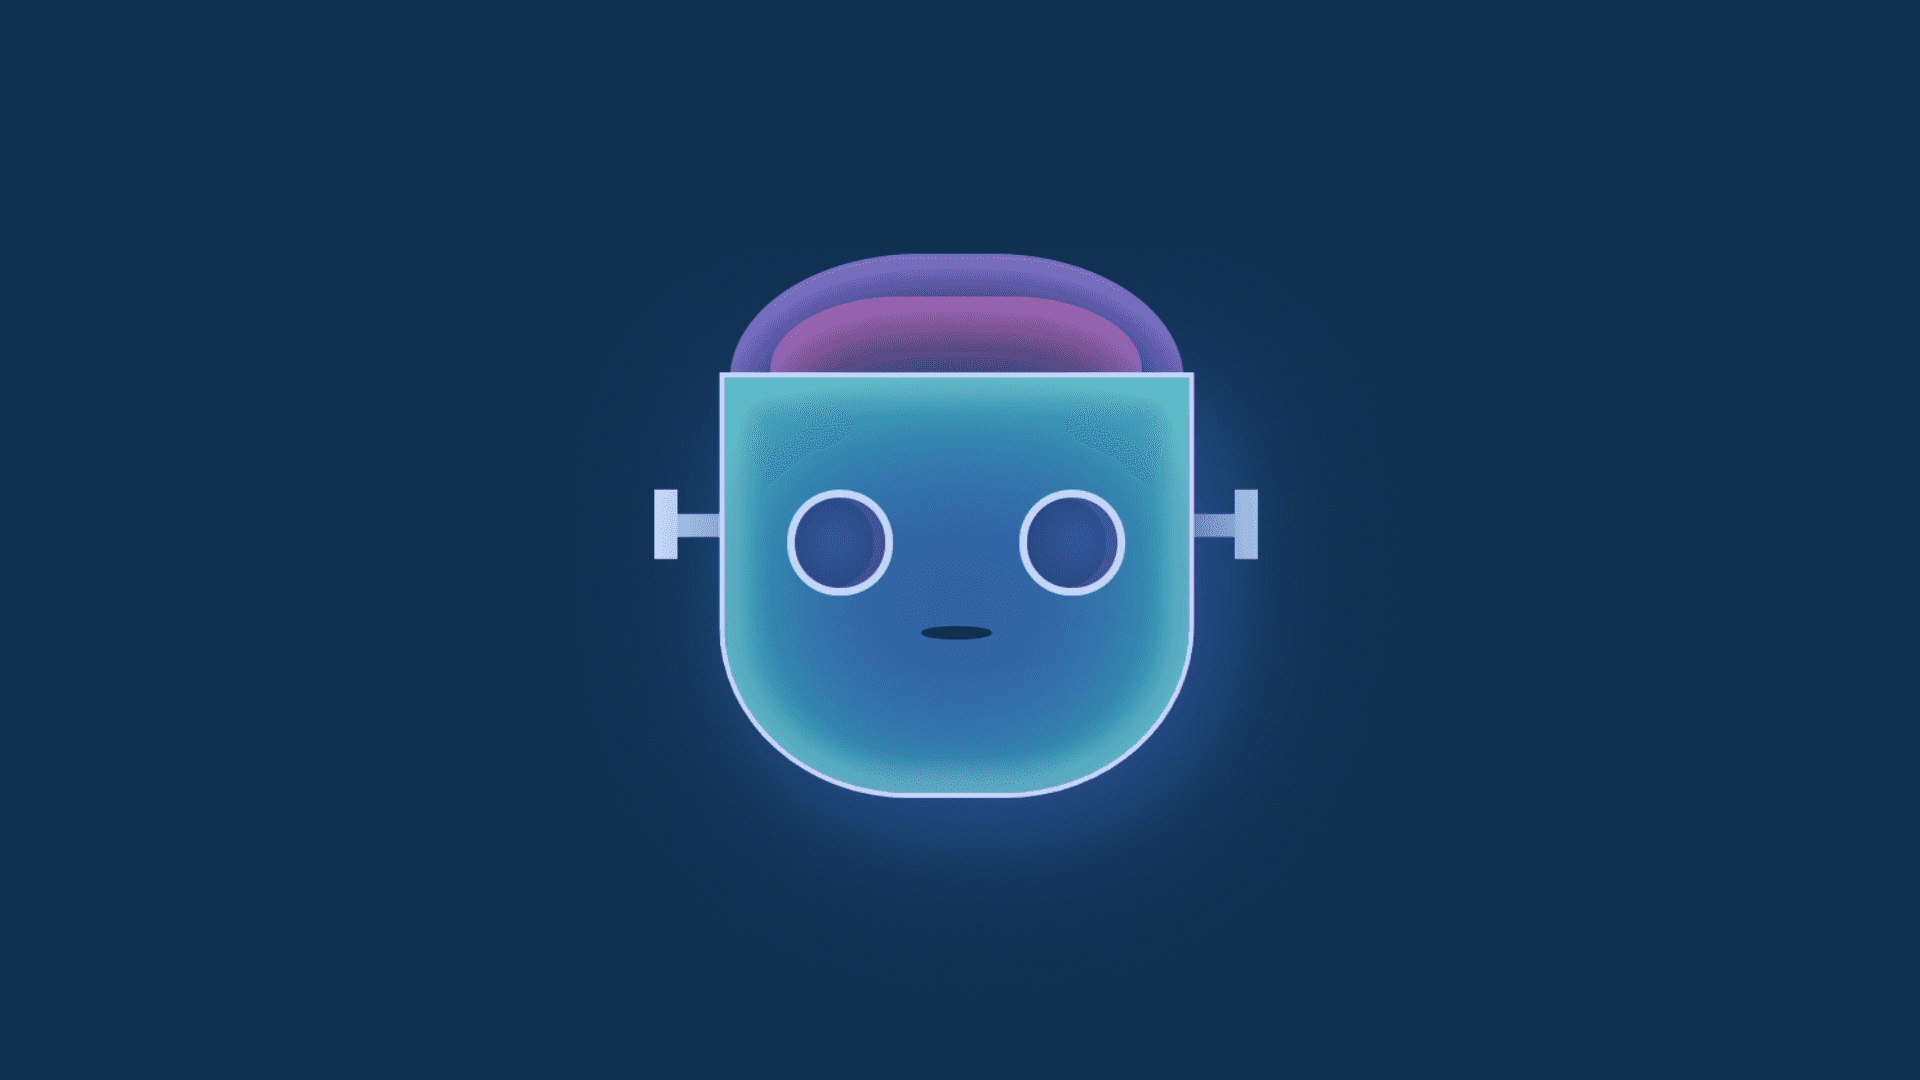 A cute robot with big eyes, a big glowing blue face, metal bolts on either side it's neck, and a pink brain exposed.